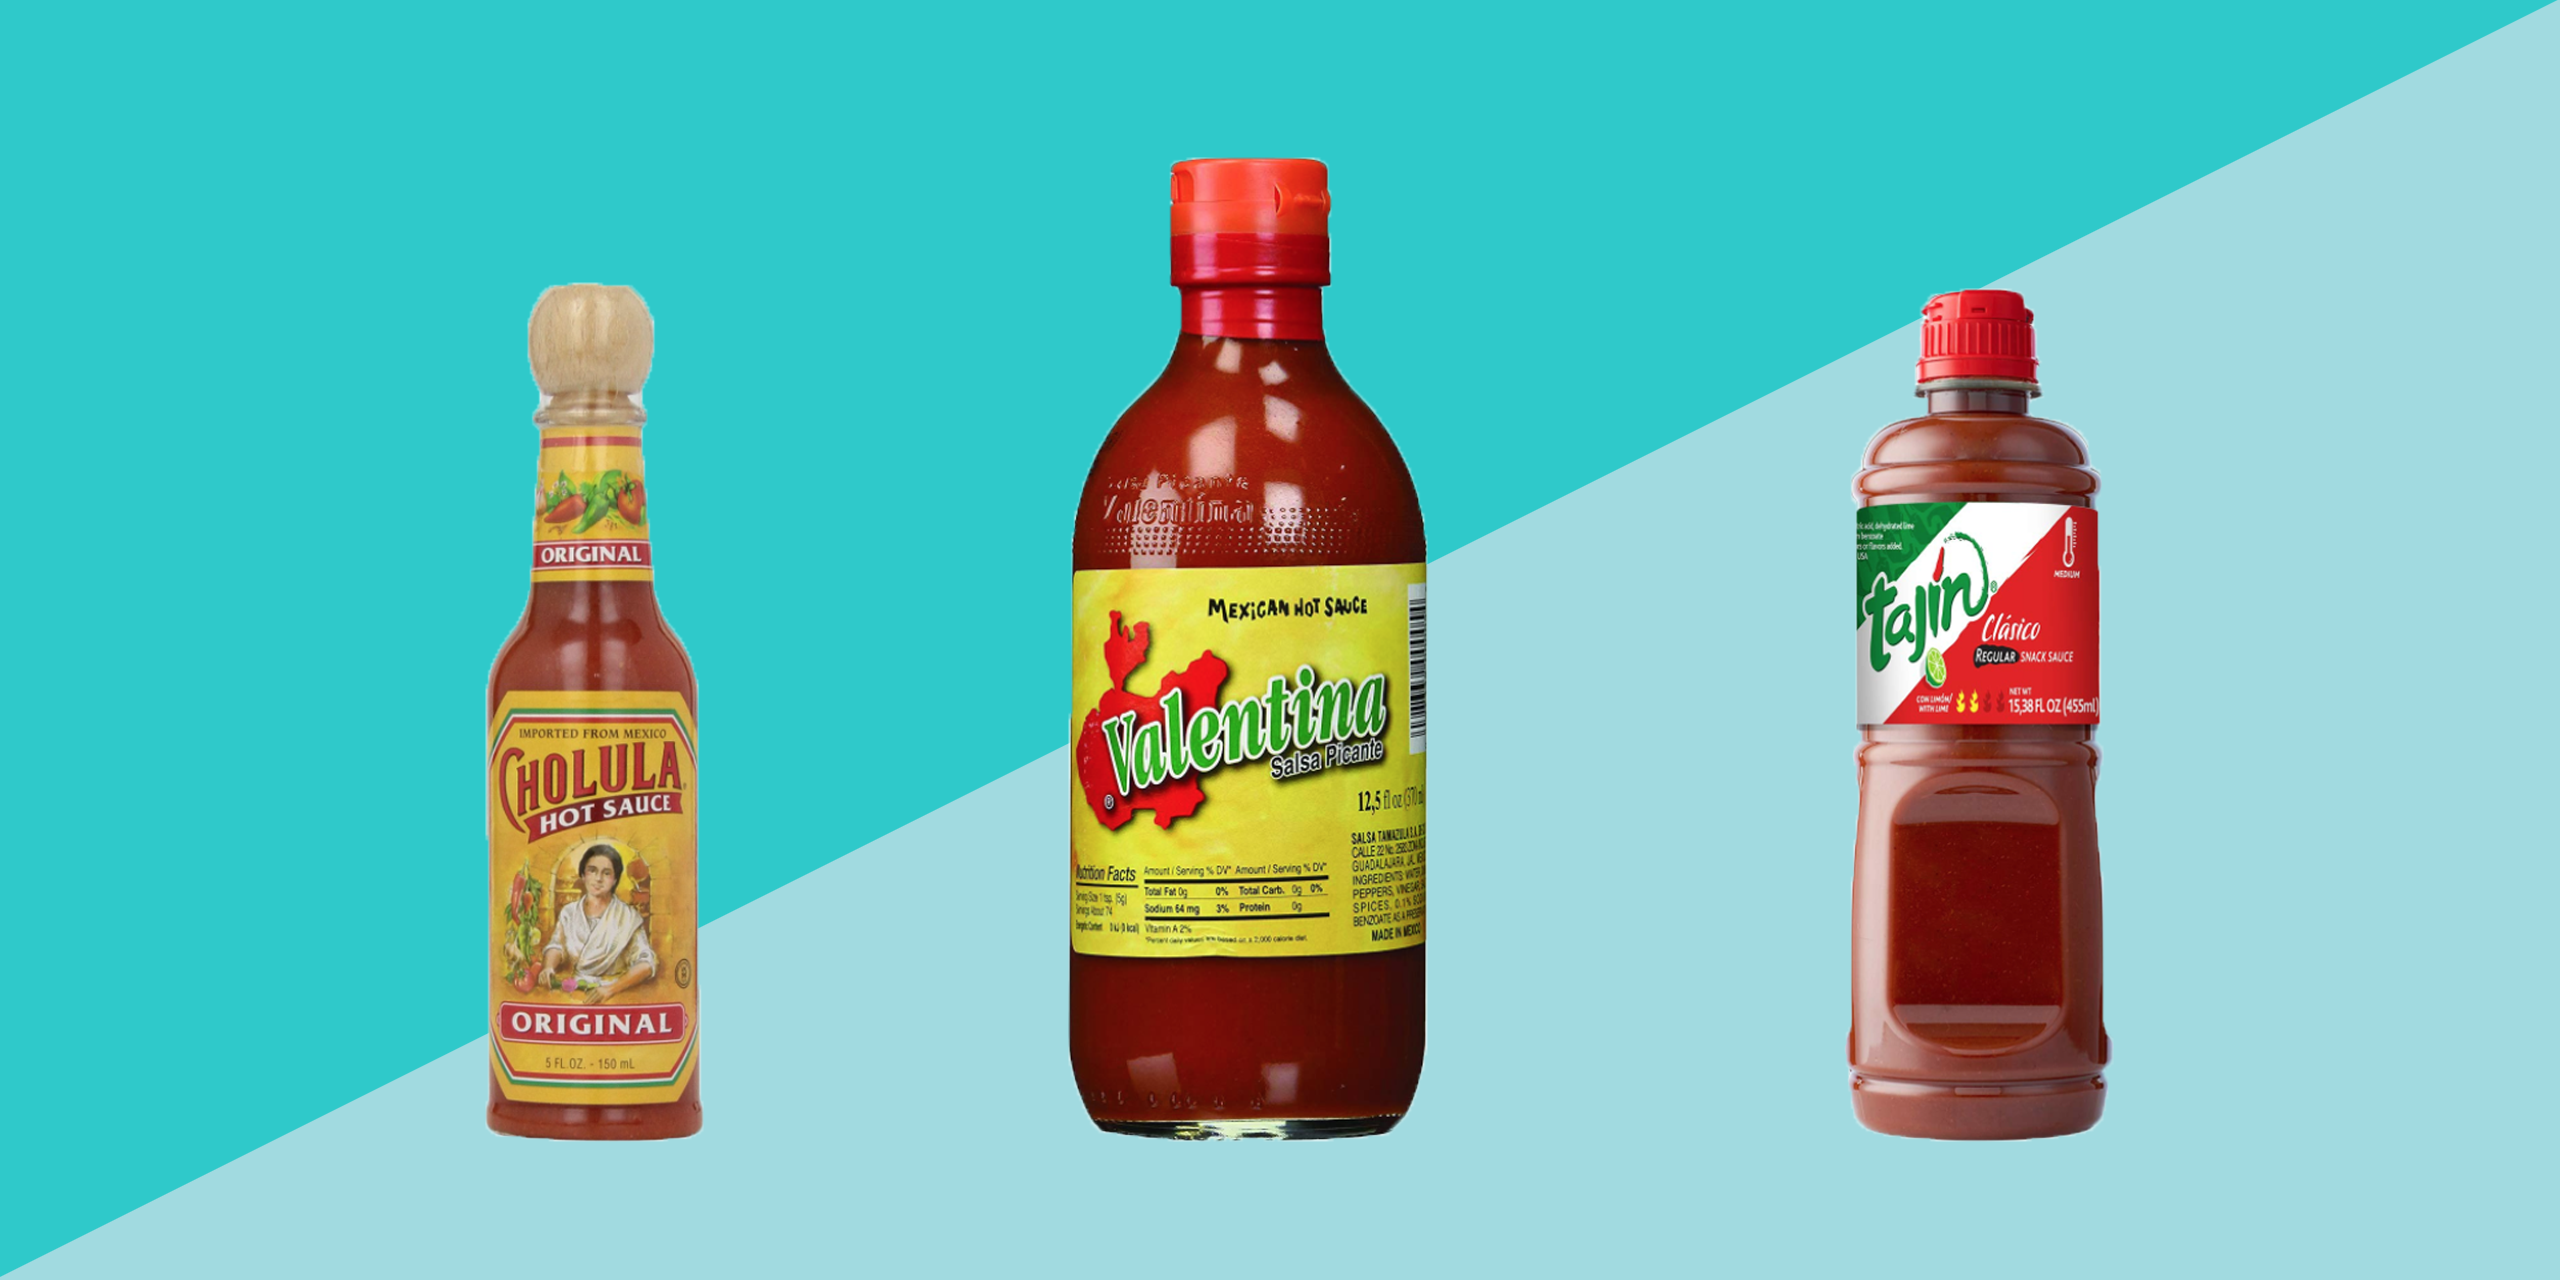 5 Authentic Mexican Hot Sauce Brands to Buy in 2022